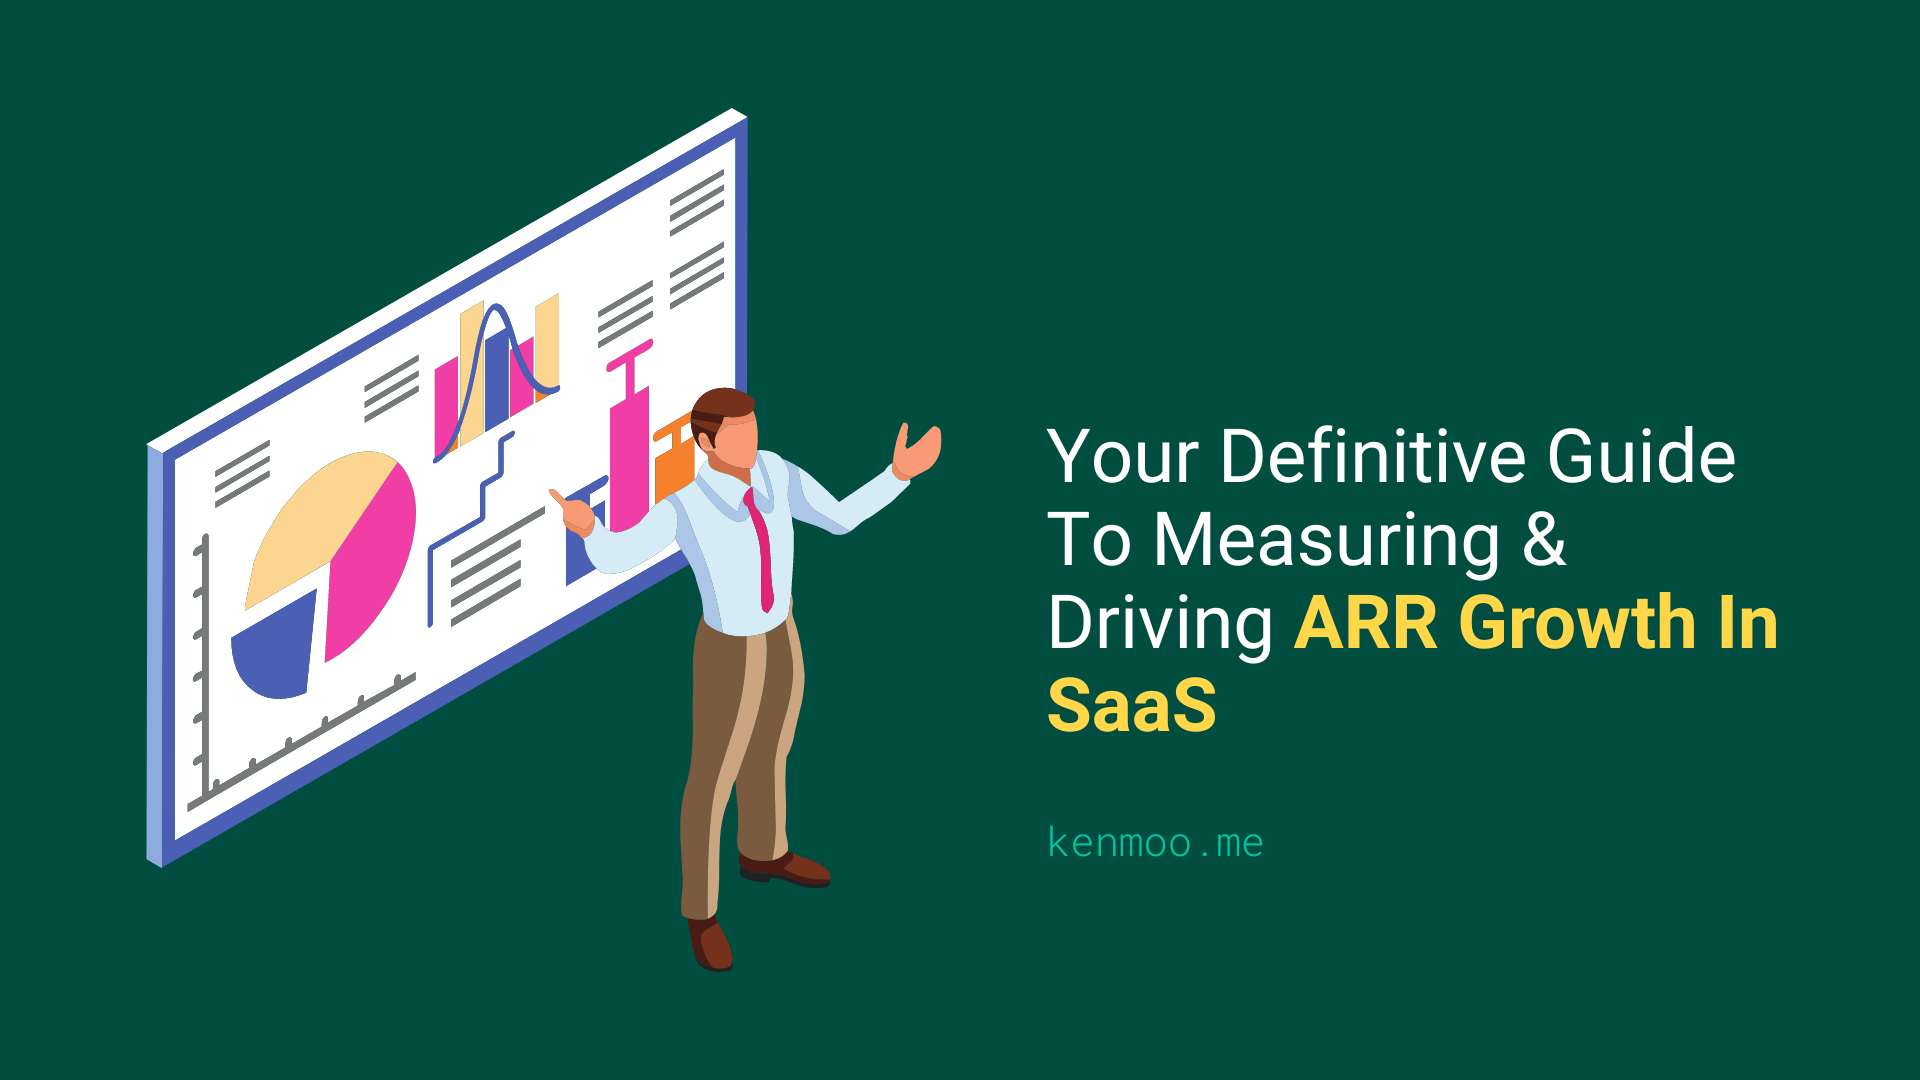 Your Definitive Guide To Measuring & Driving ARR Growth In SaaS